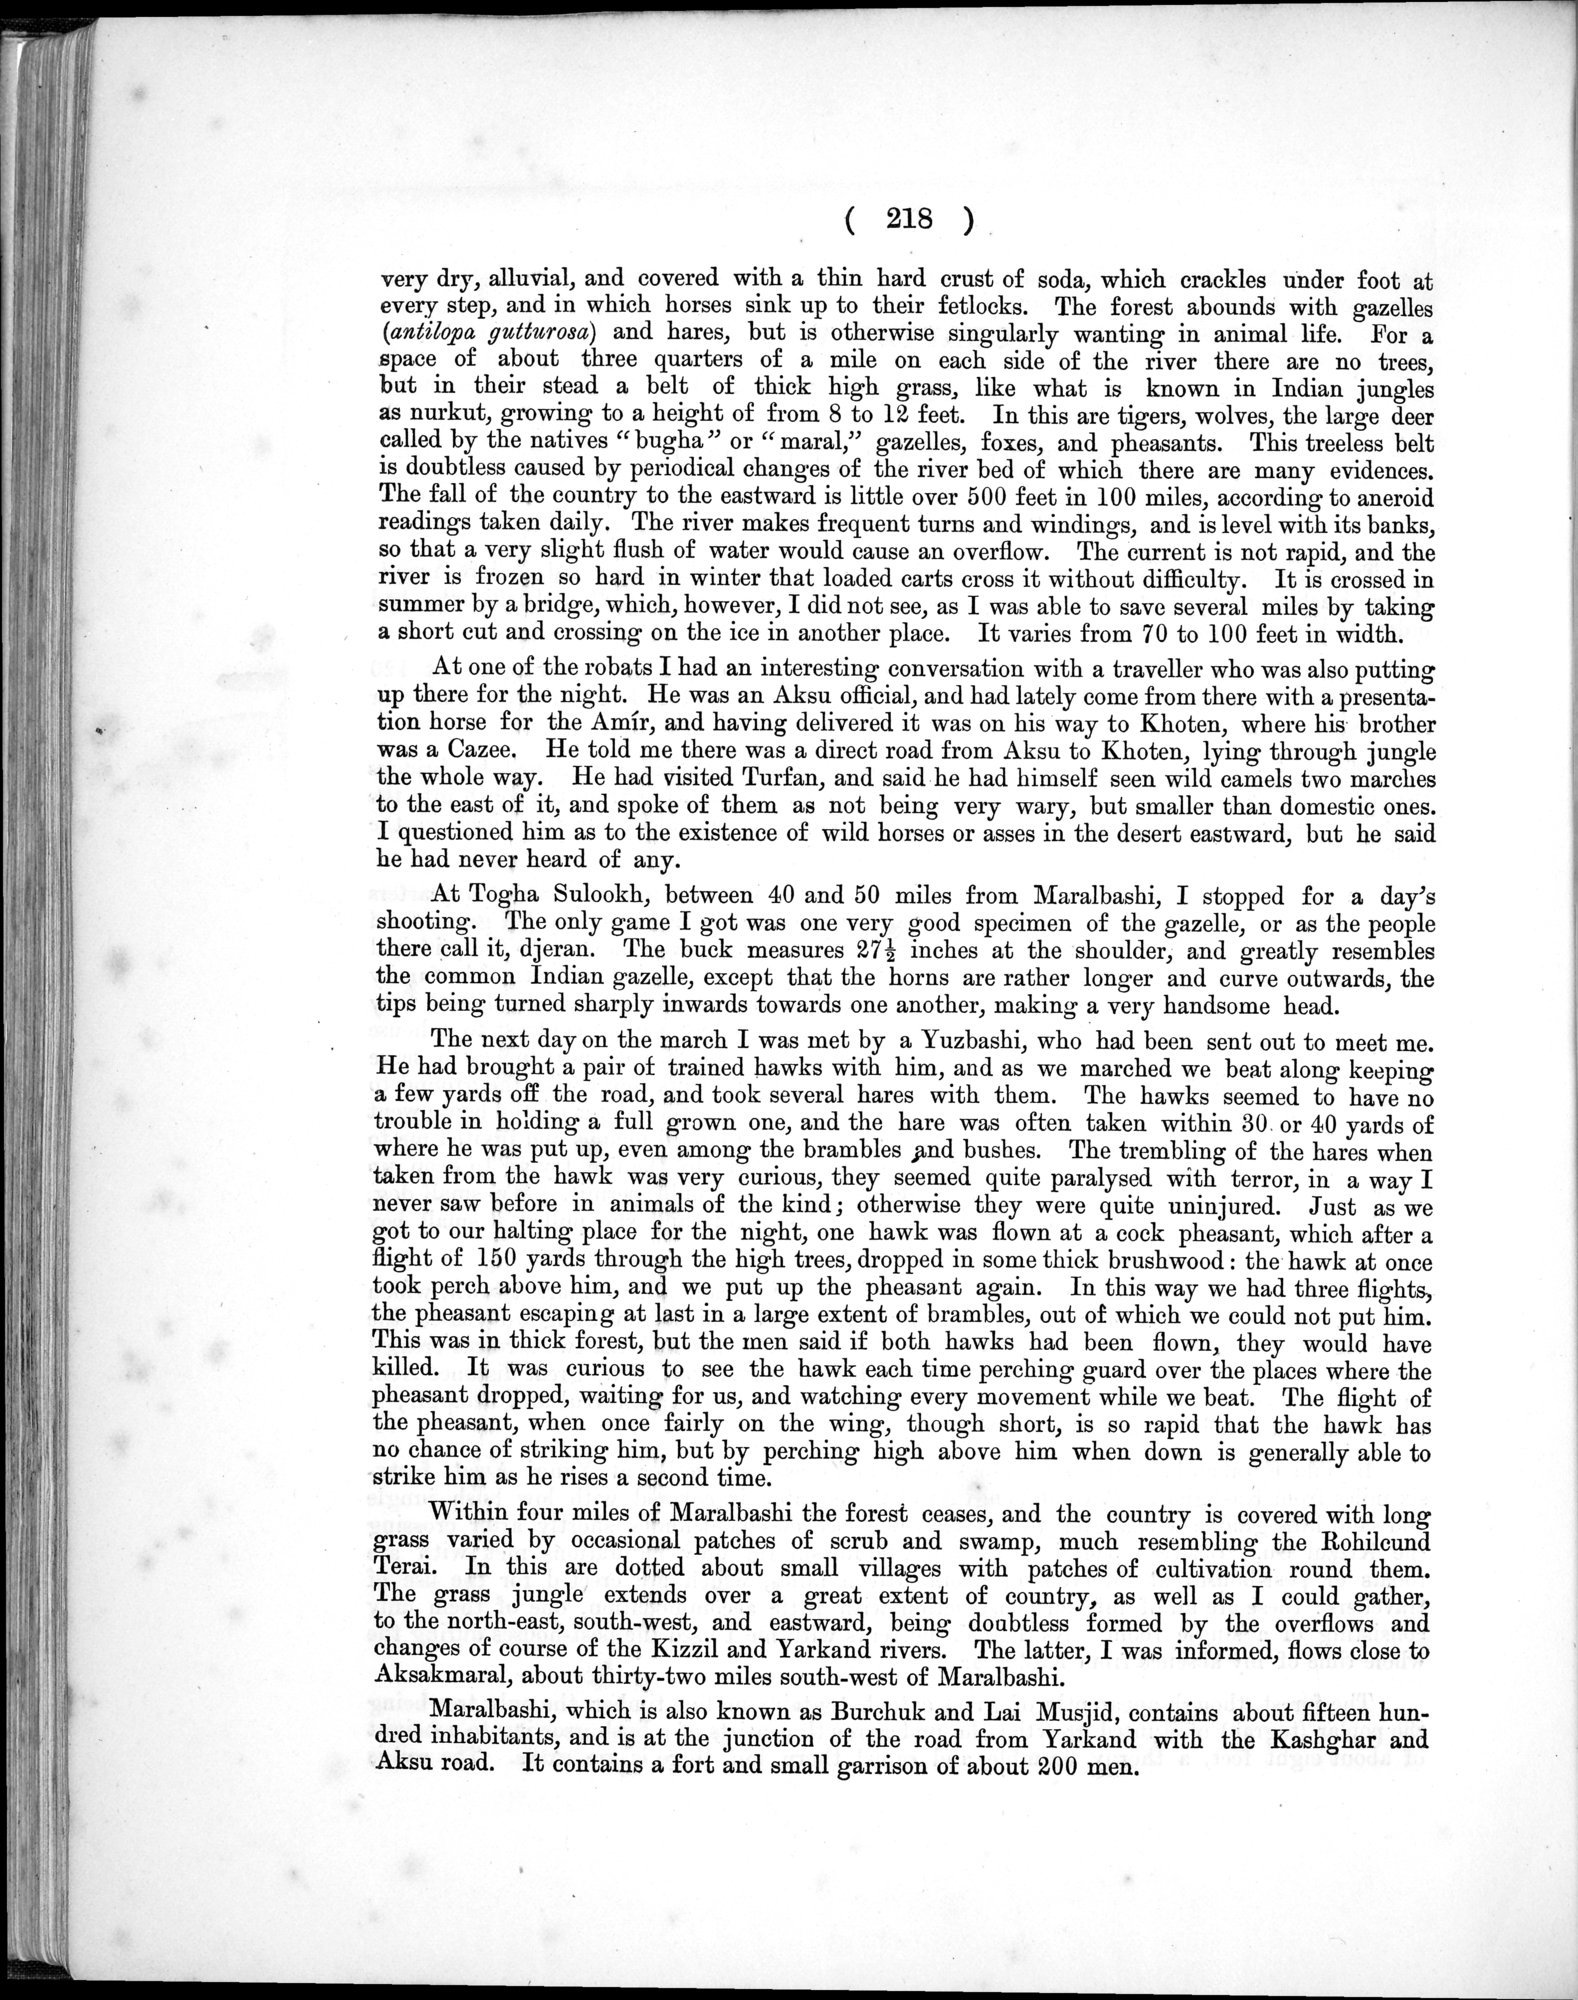 Report of a Mission to Yarkund in 1873 : vol.1 / Page 312 (Grayscale High Resolution Image)